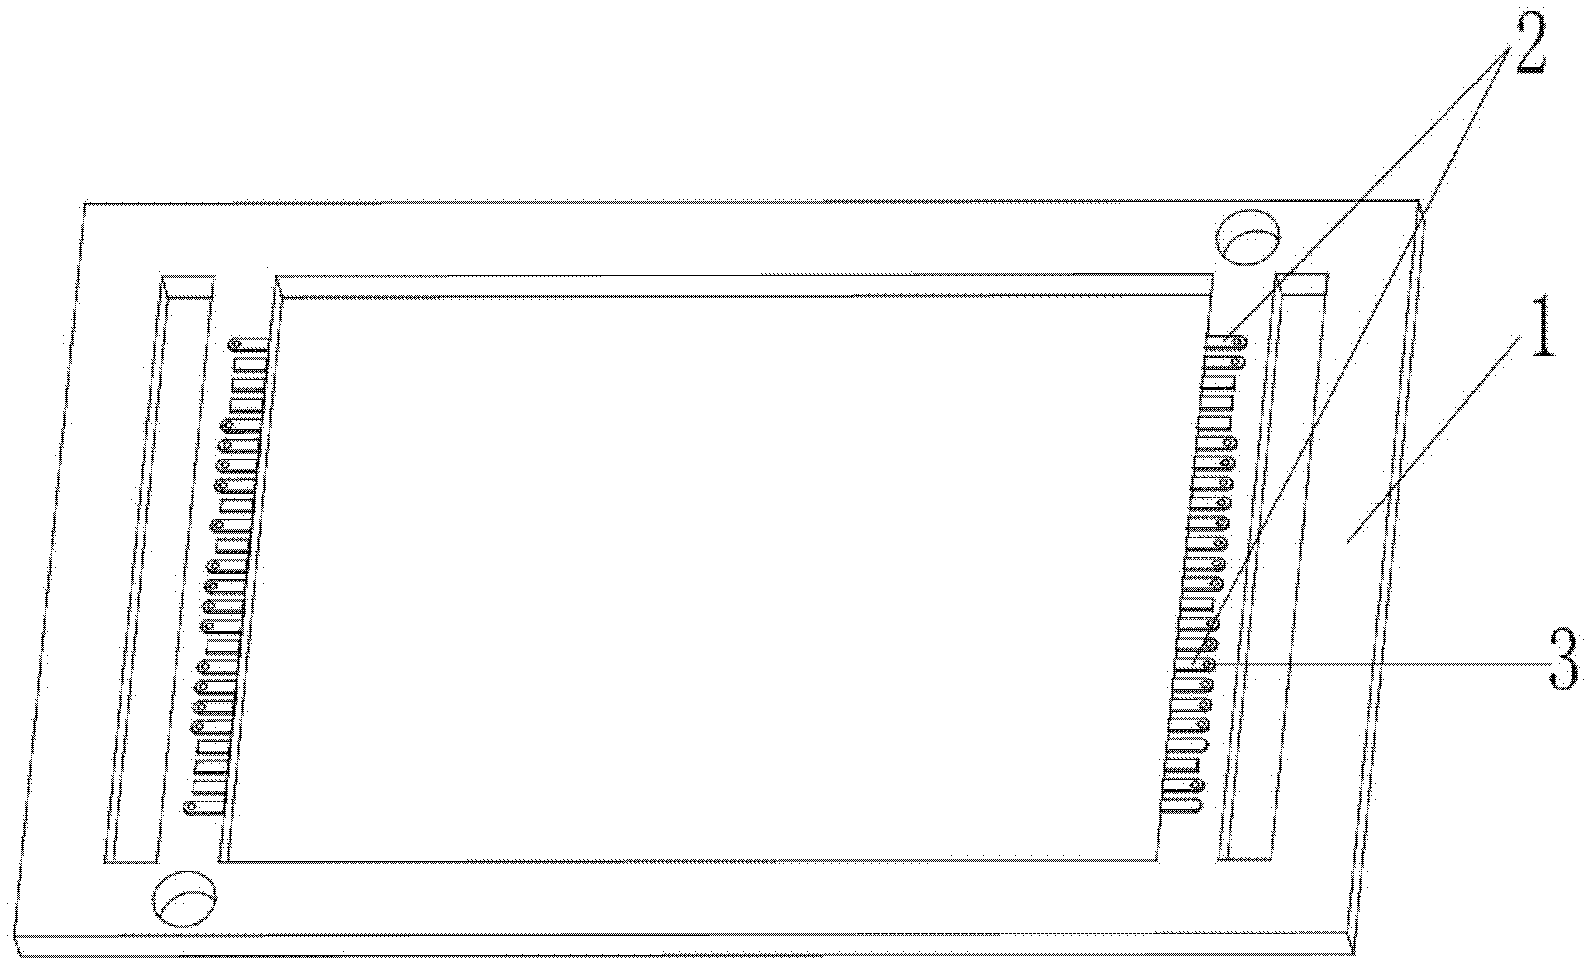 Stacked-assembled substrate and stacked assembly method of TSOP (Thin Small Outline Package) integrated circuits